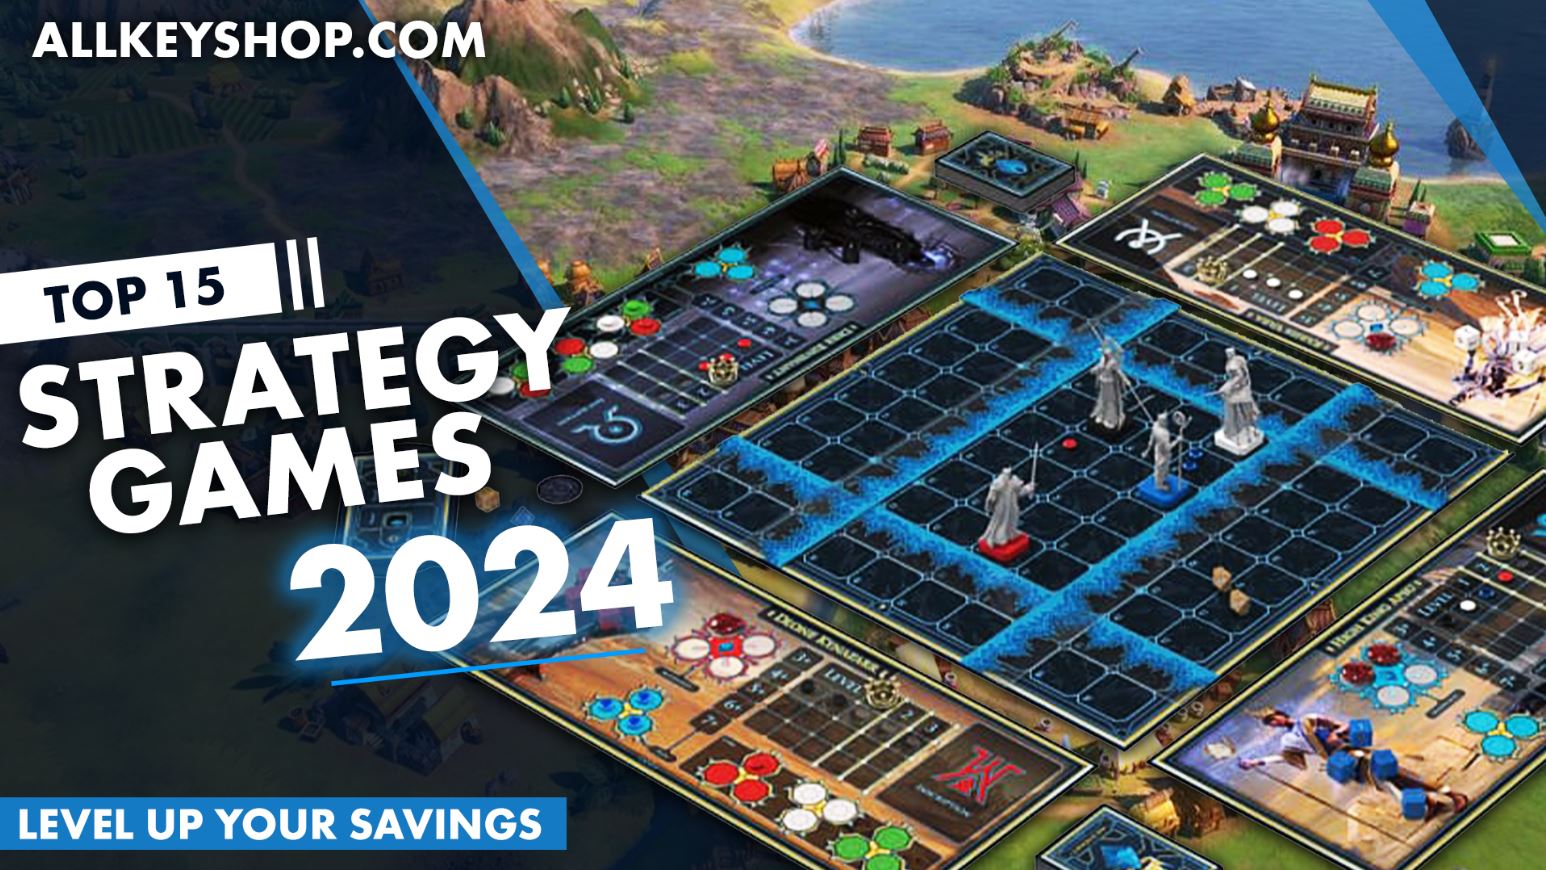 Top 15 Strategy Games of 2024